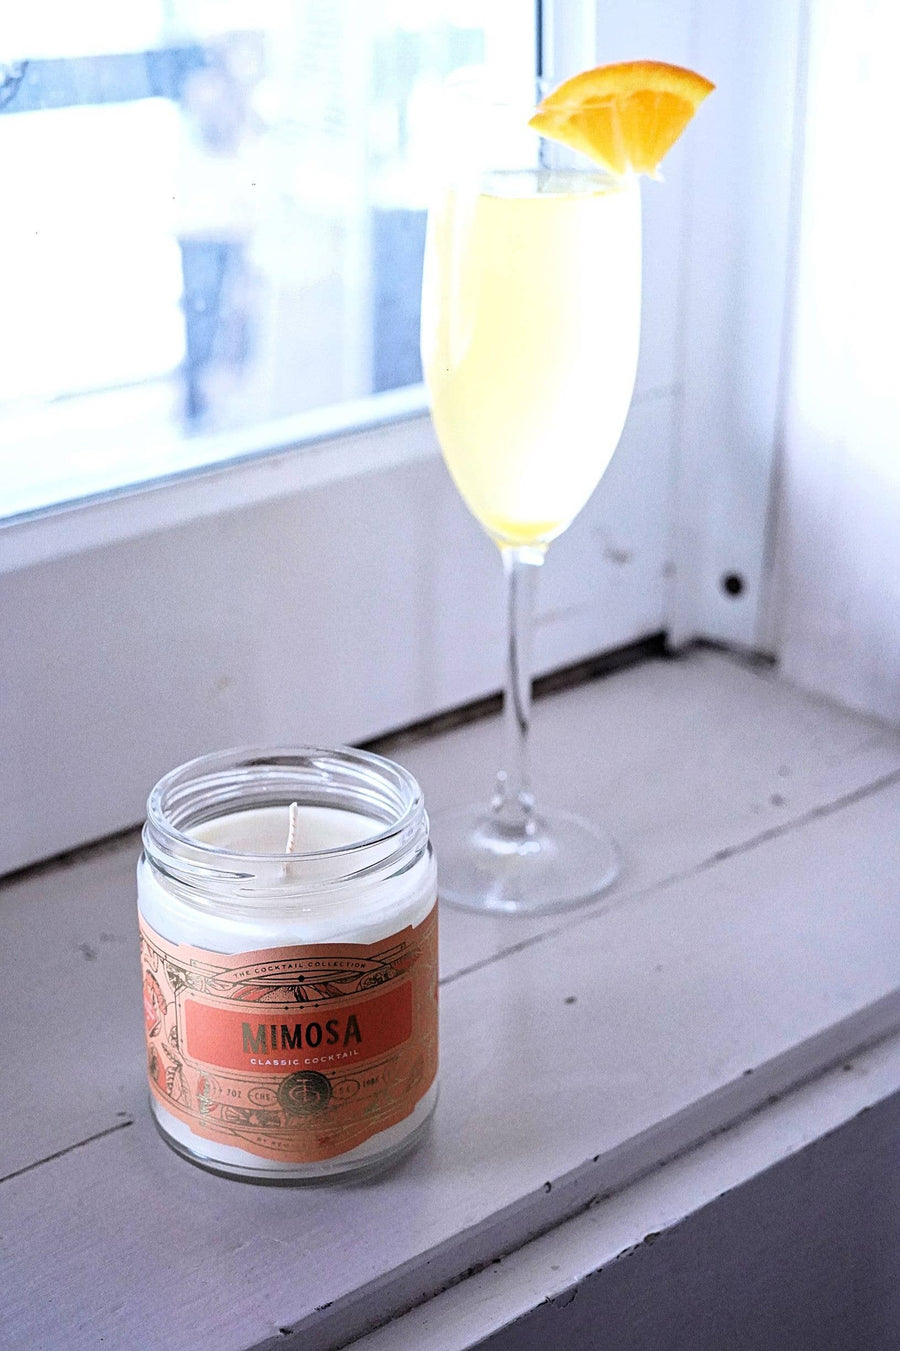 Mimosa Candle (7 oz)